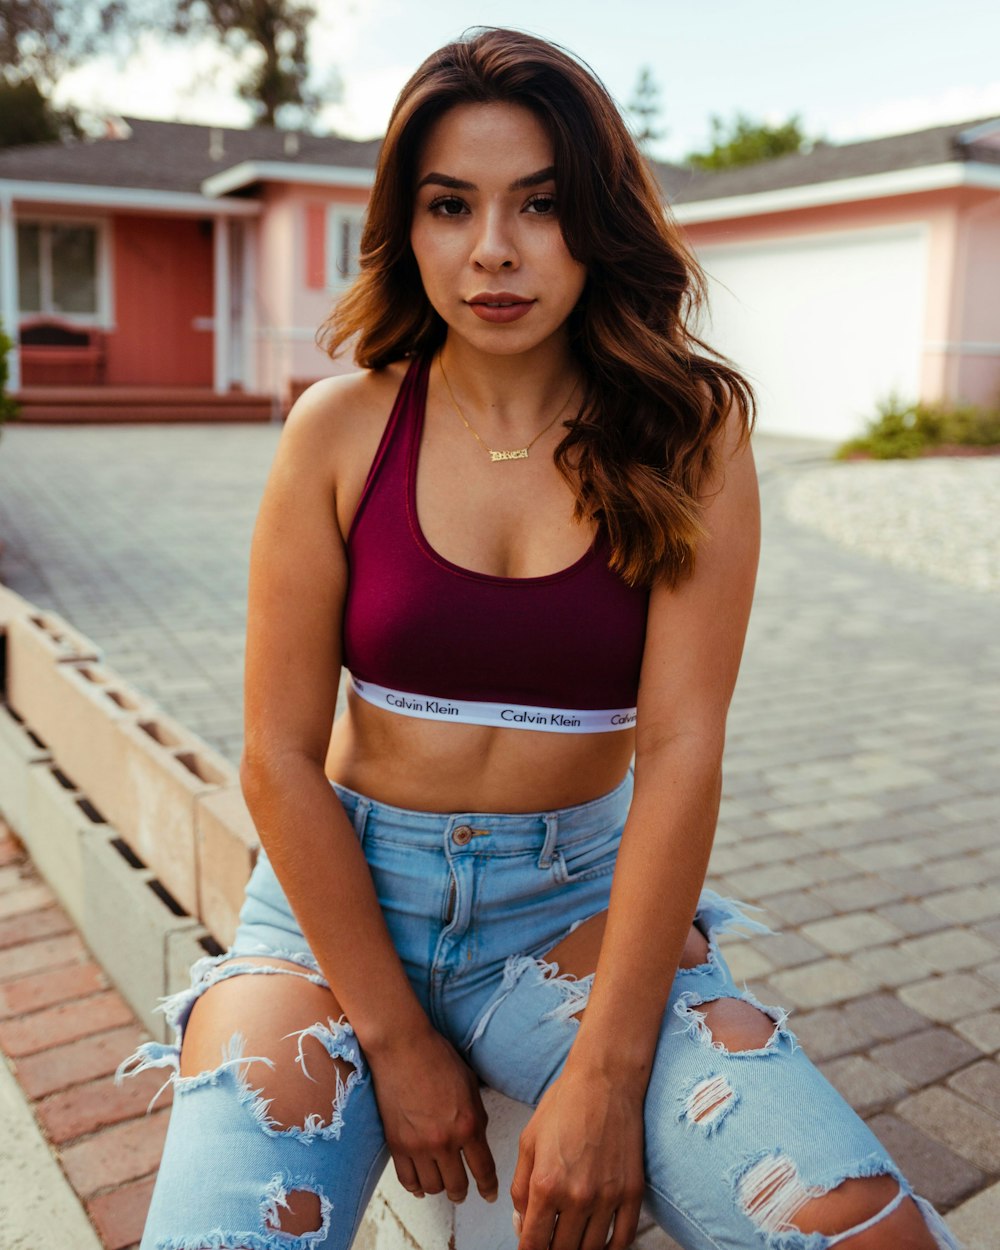 woman in purple sports bra and blue denim shorts sitting on concrete stairs during daytime